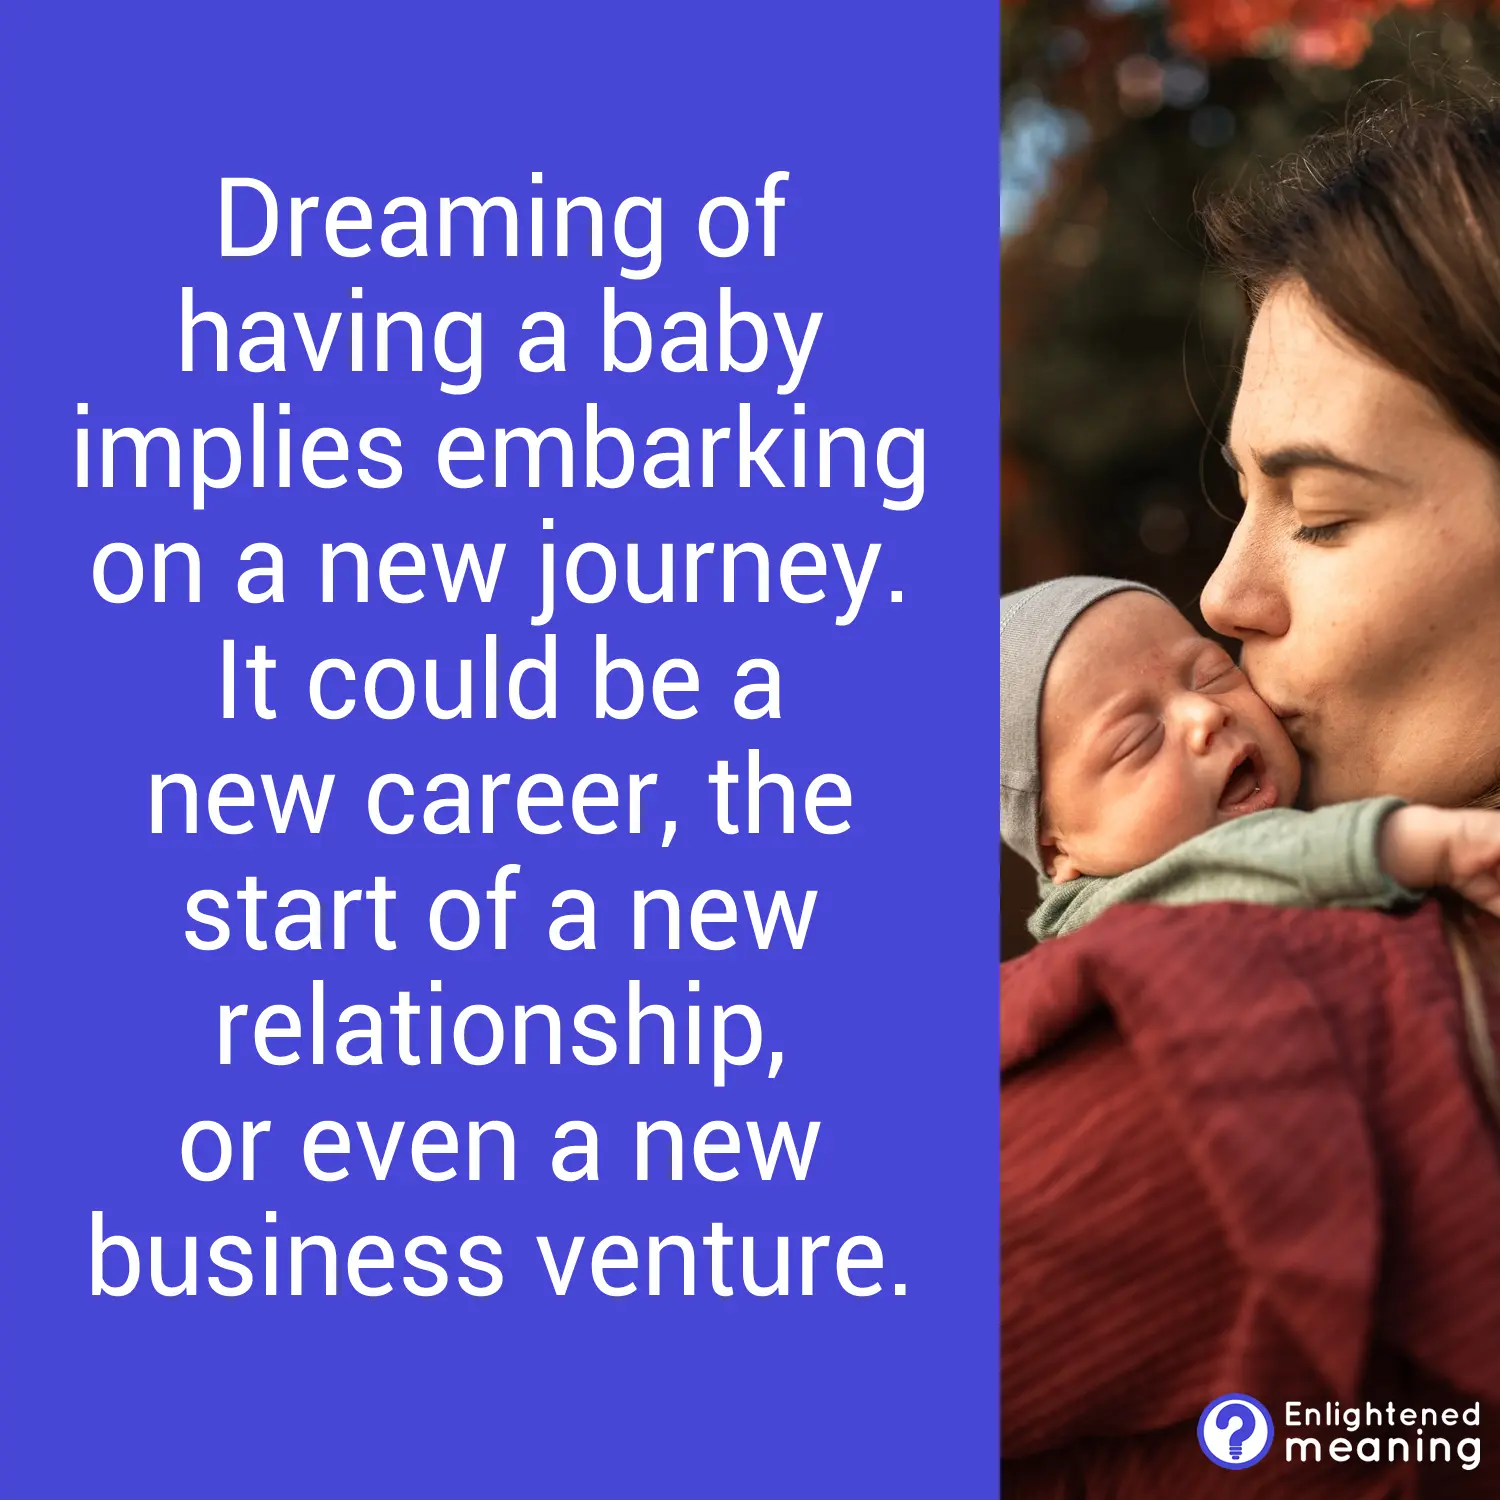 What does it mean to dream about having a baby